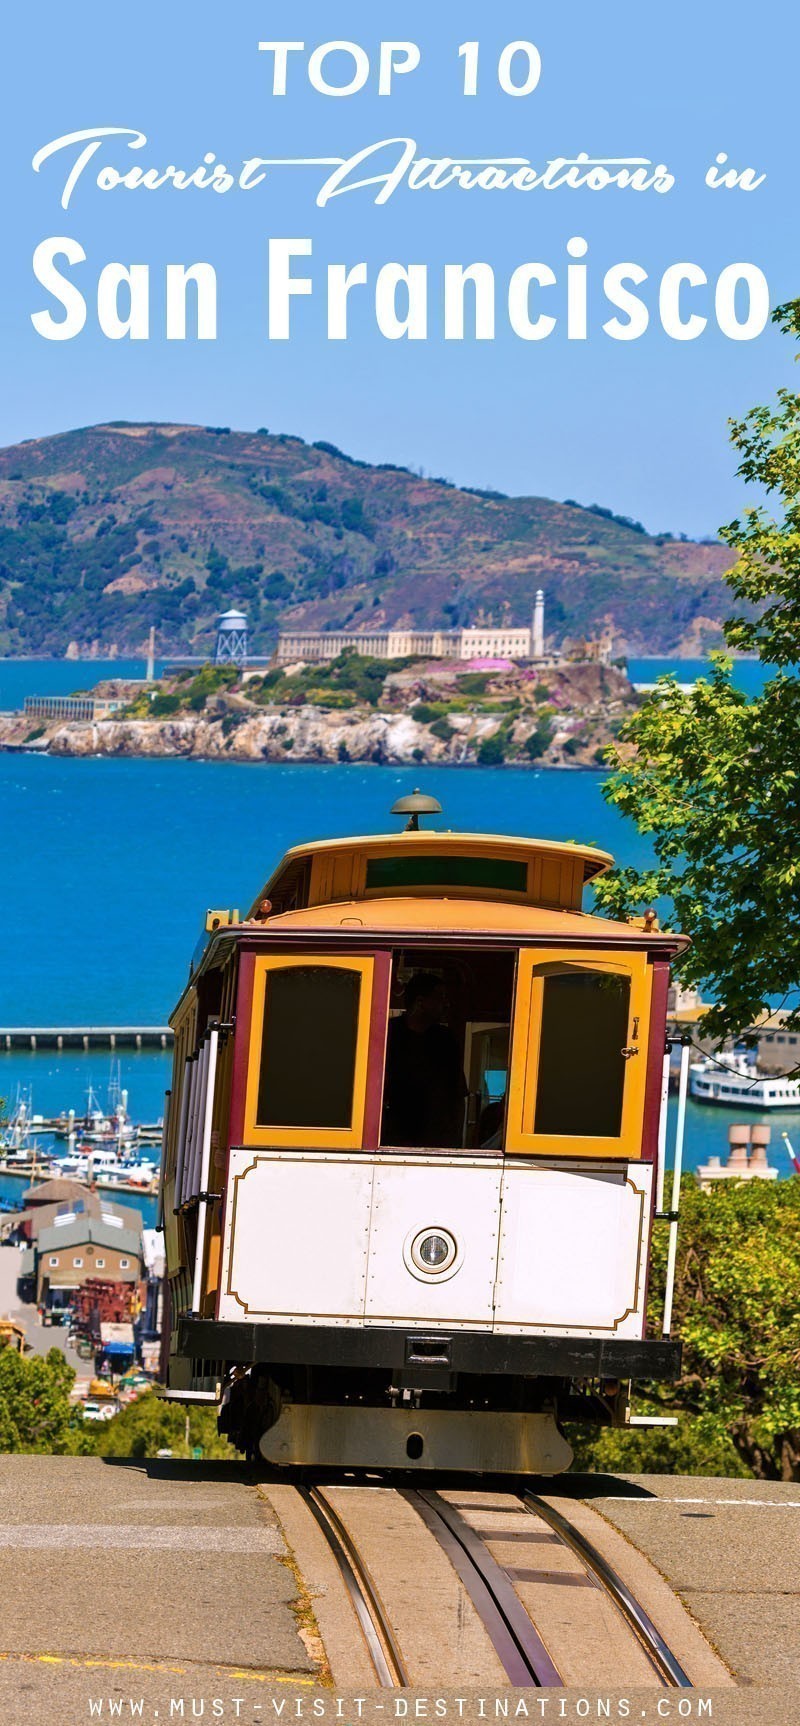  TOP 10 Tourist Attractions In San Francisco #travel #sanfrancisco